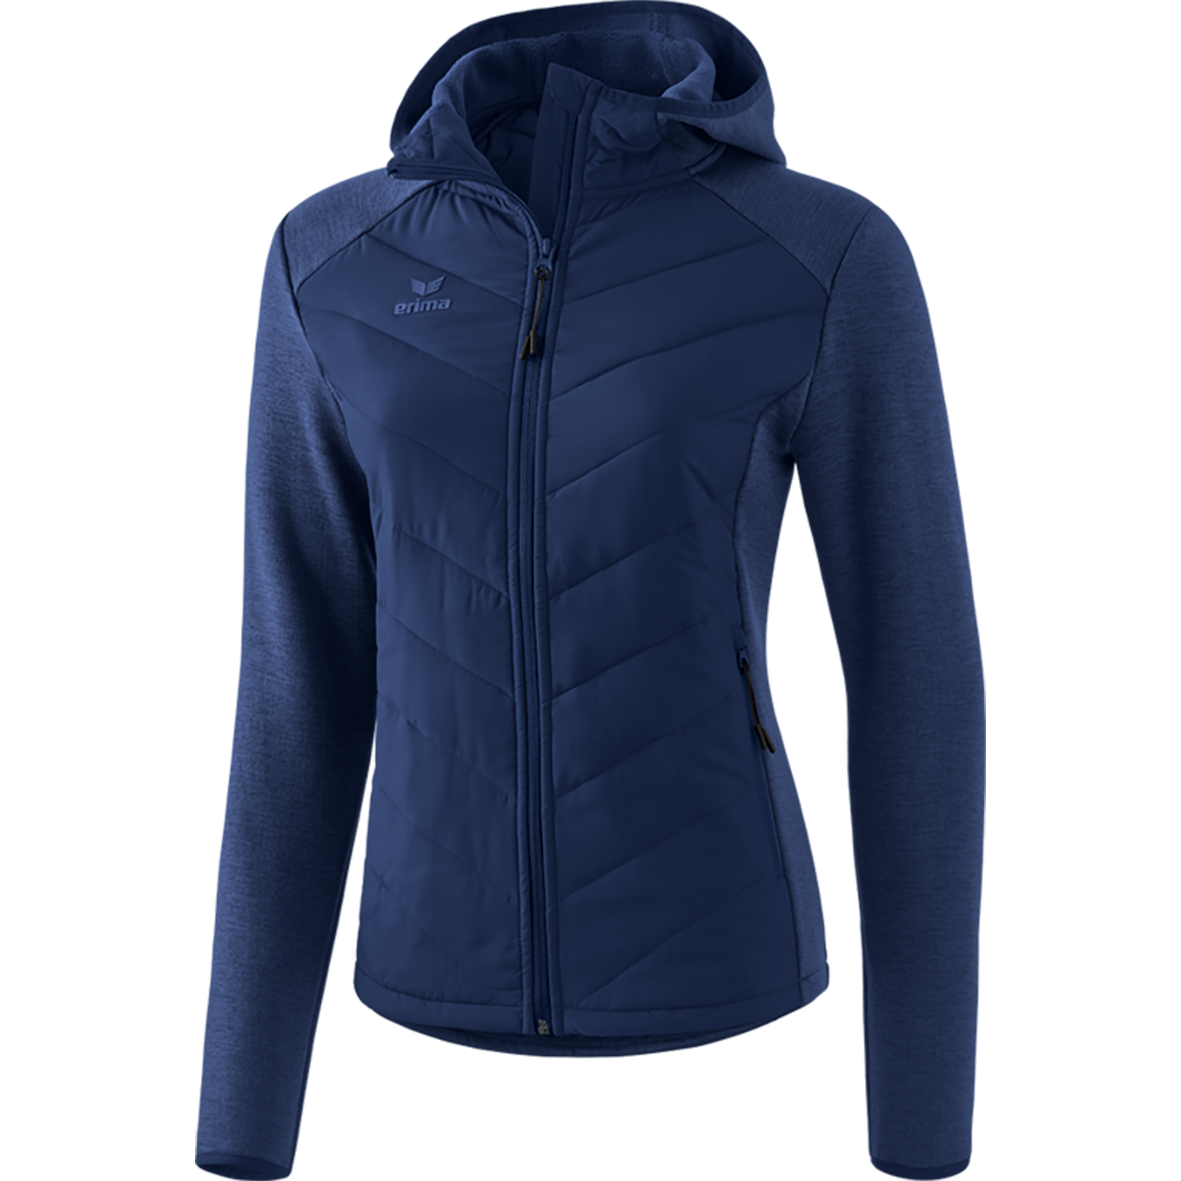 ERIMA QUILTED JACKET FUNCTION, NEW NAVY WOMEN.